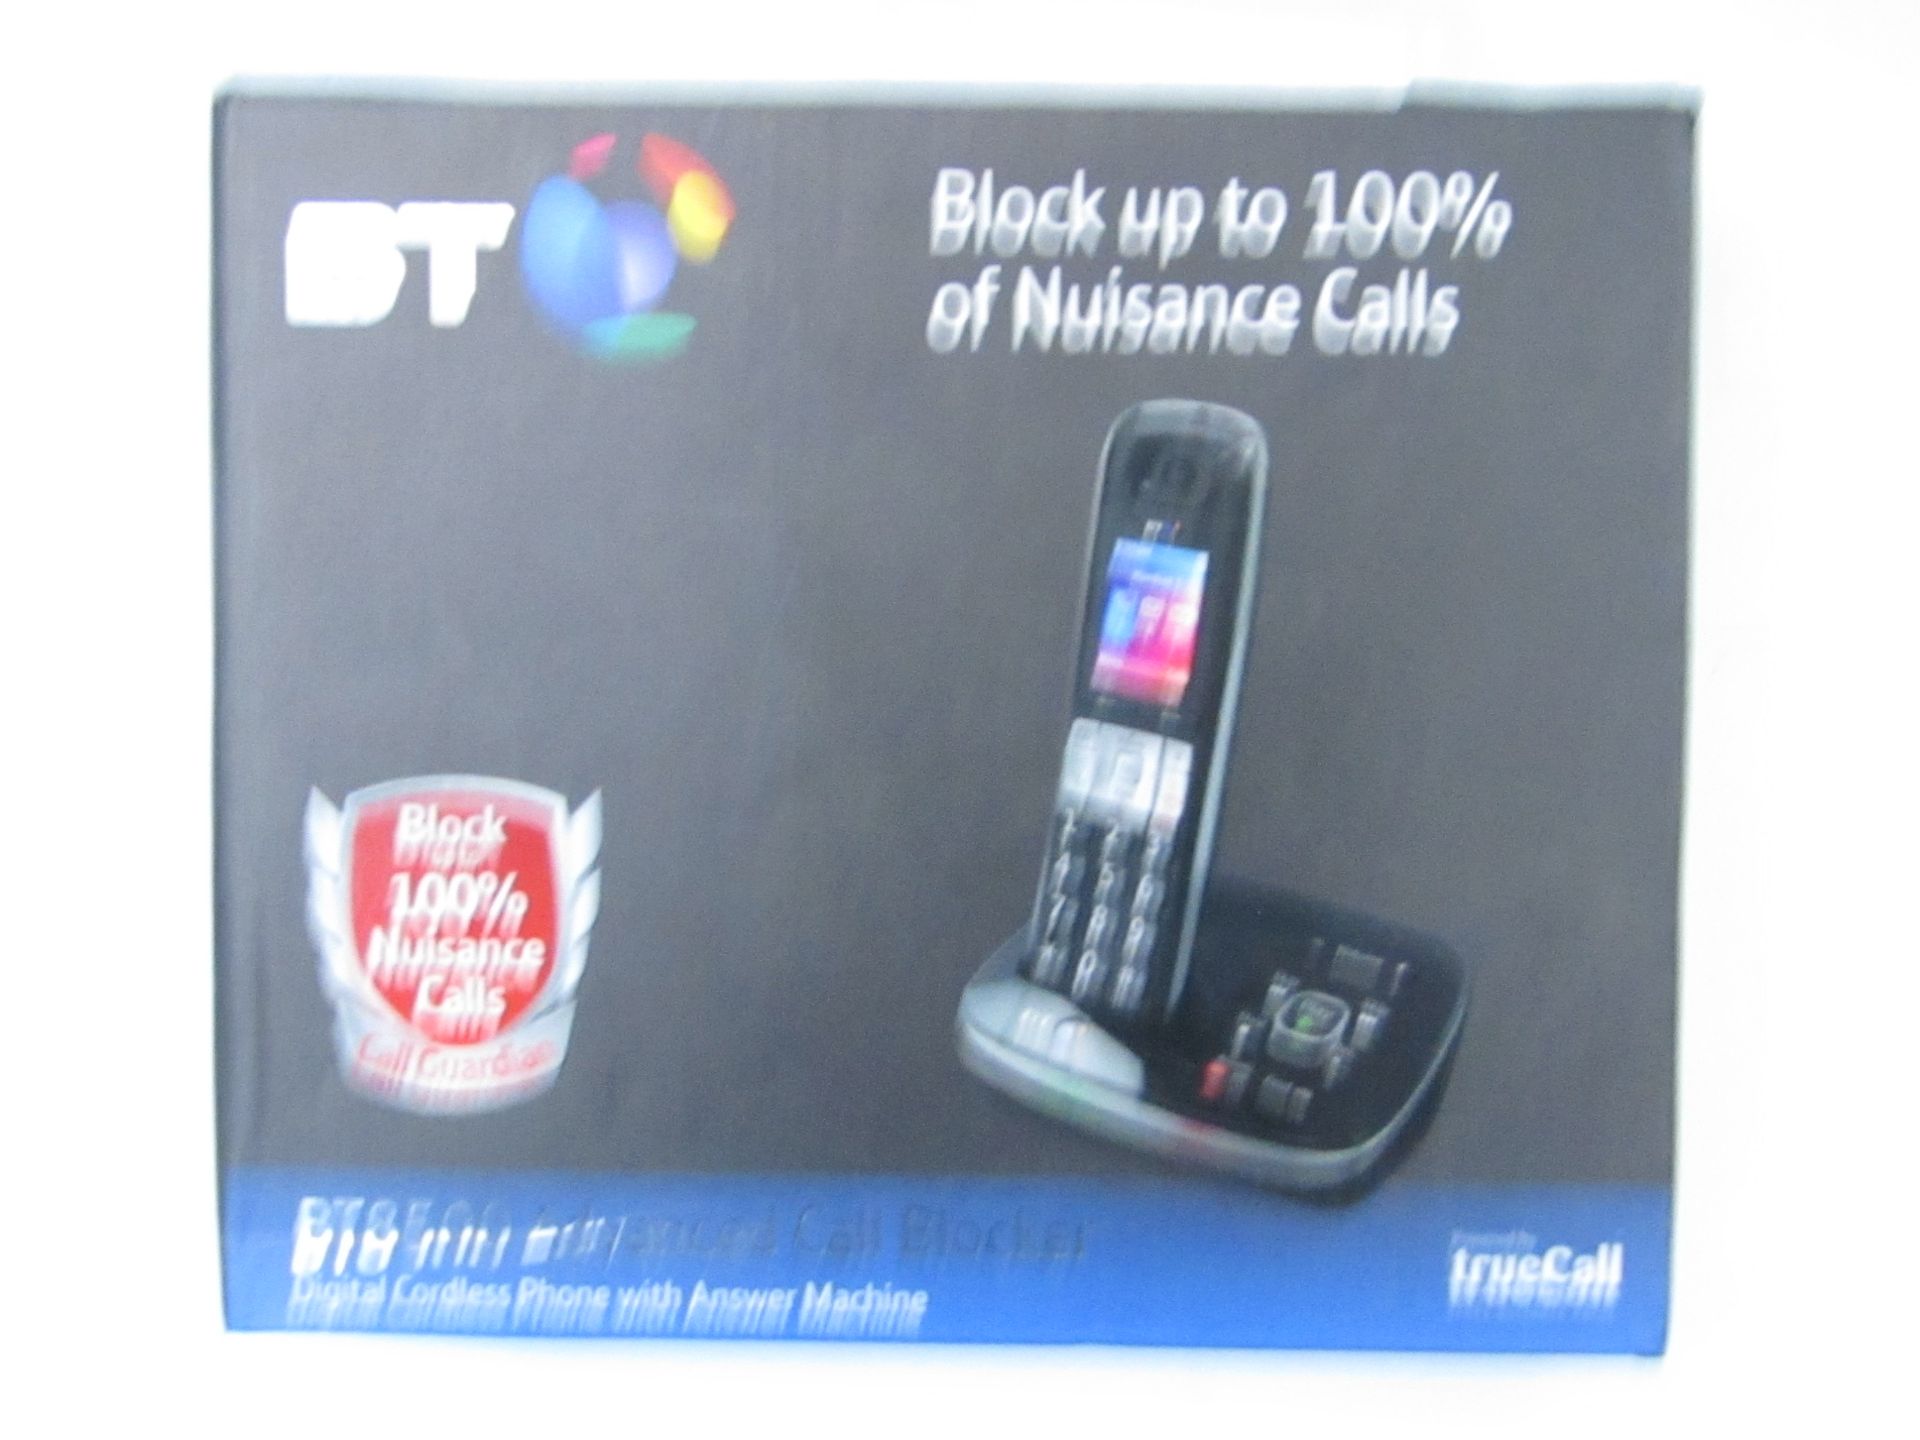 BT8500 tcordless Digital phone with call blocker, Boxed and Unchecked